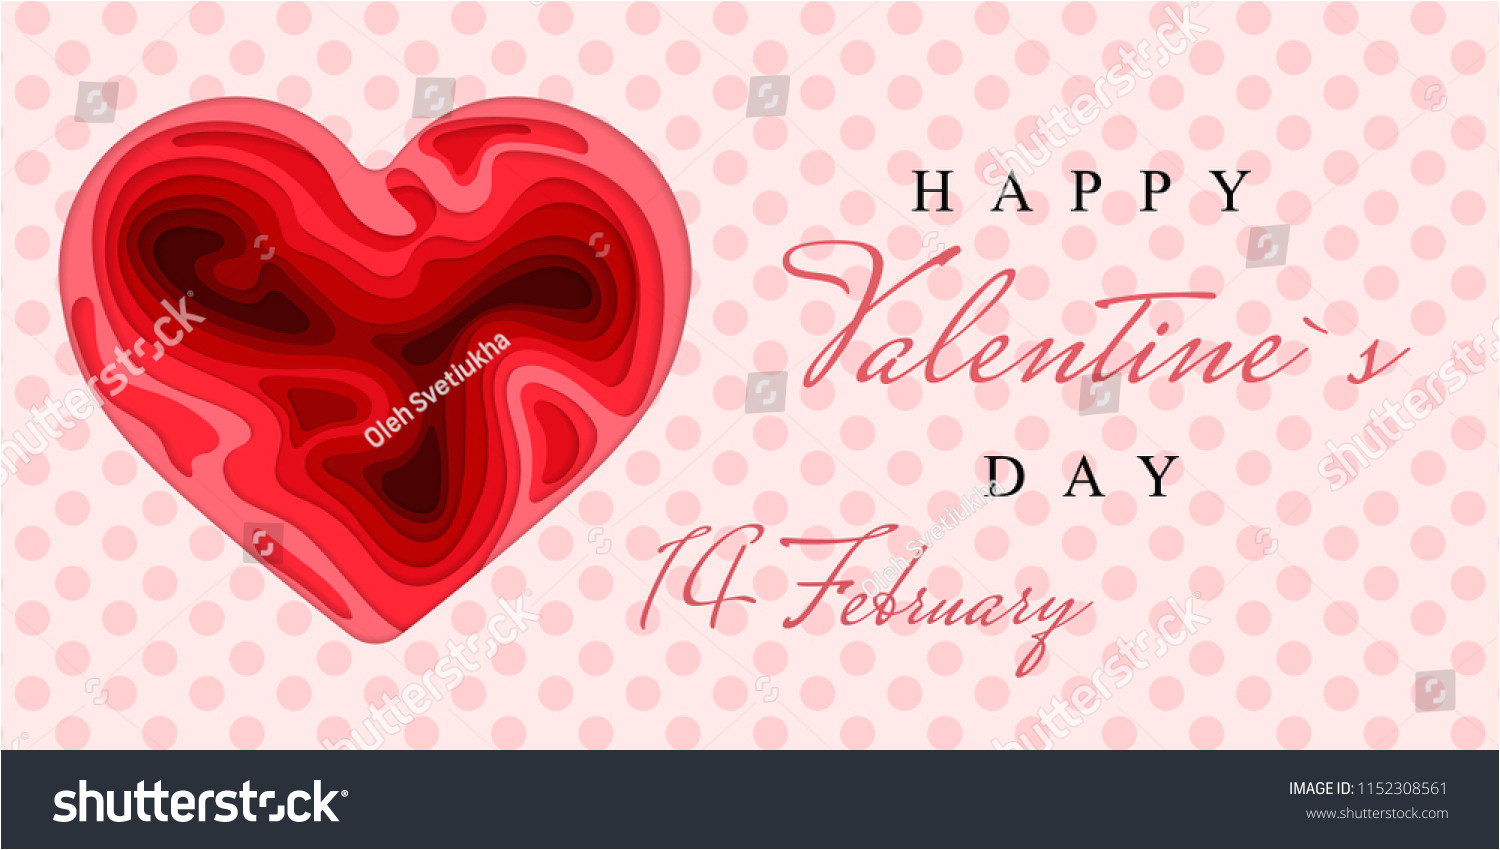 stock vector happy valentine s day d paper cut heart concept design greeting card paper carving heart shapes 1152308561 jpg